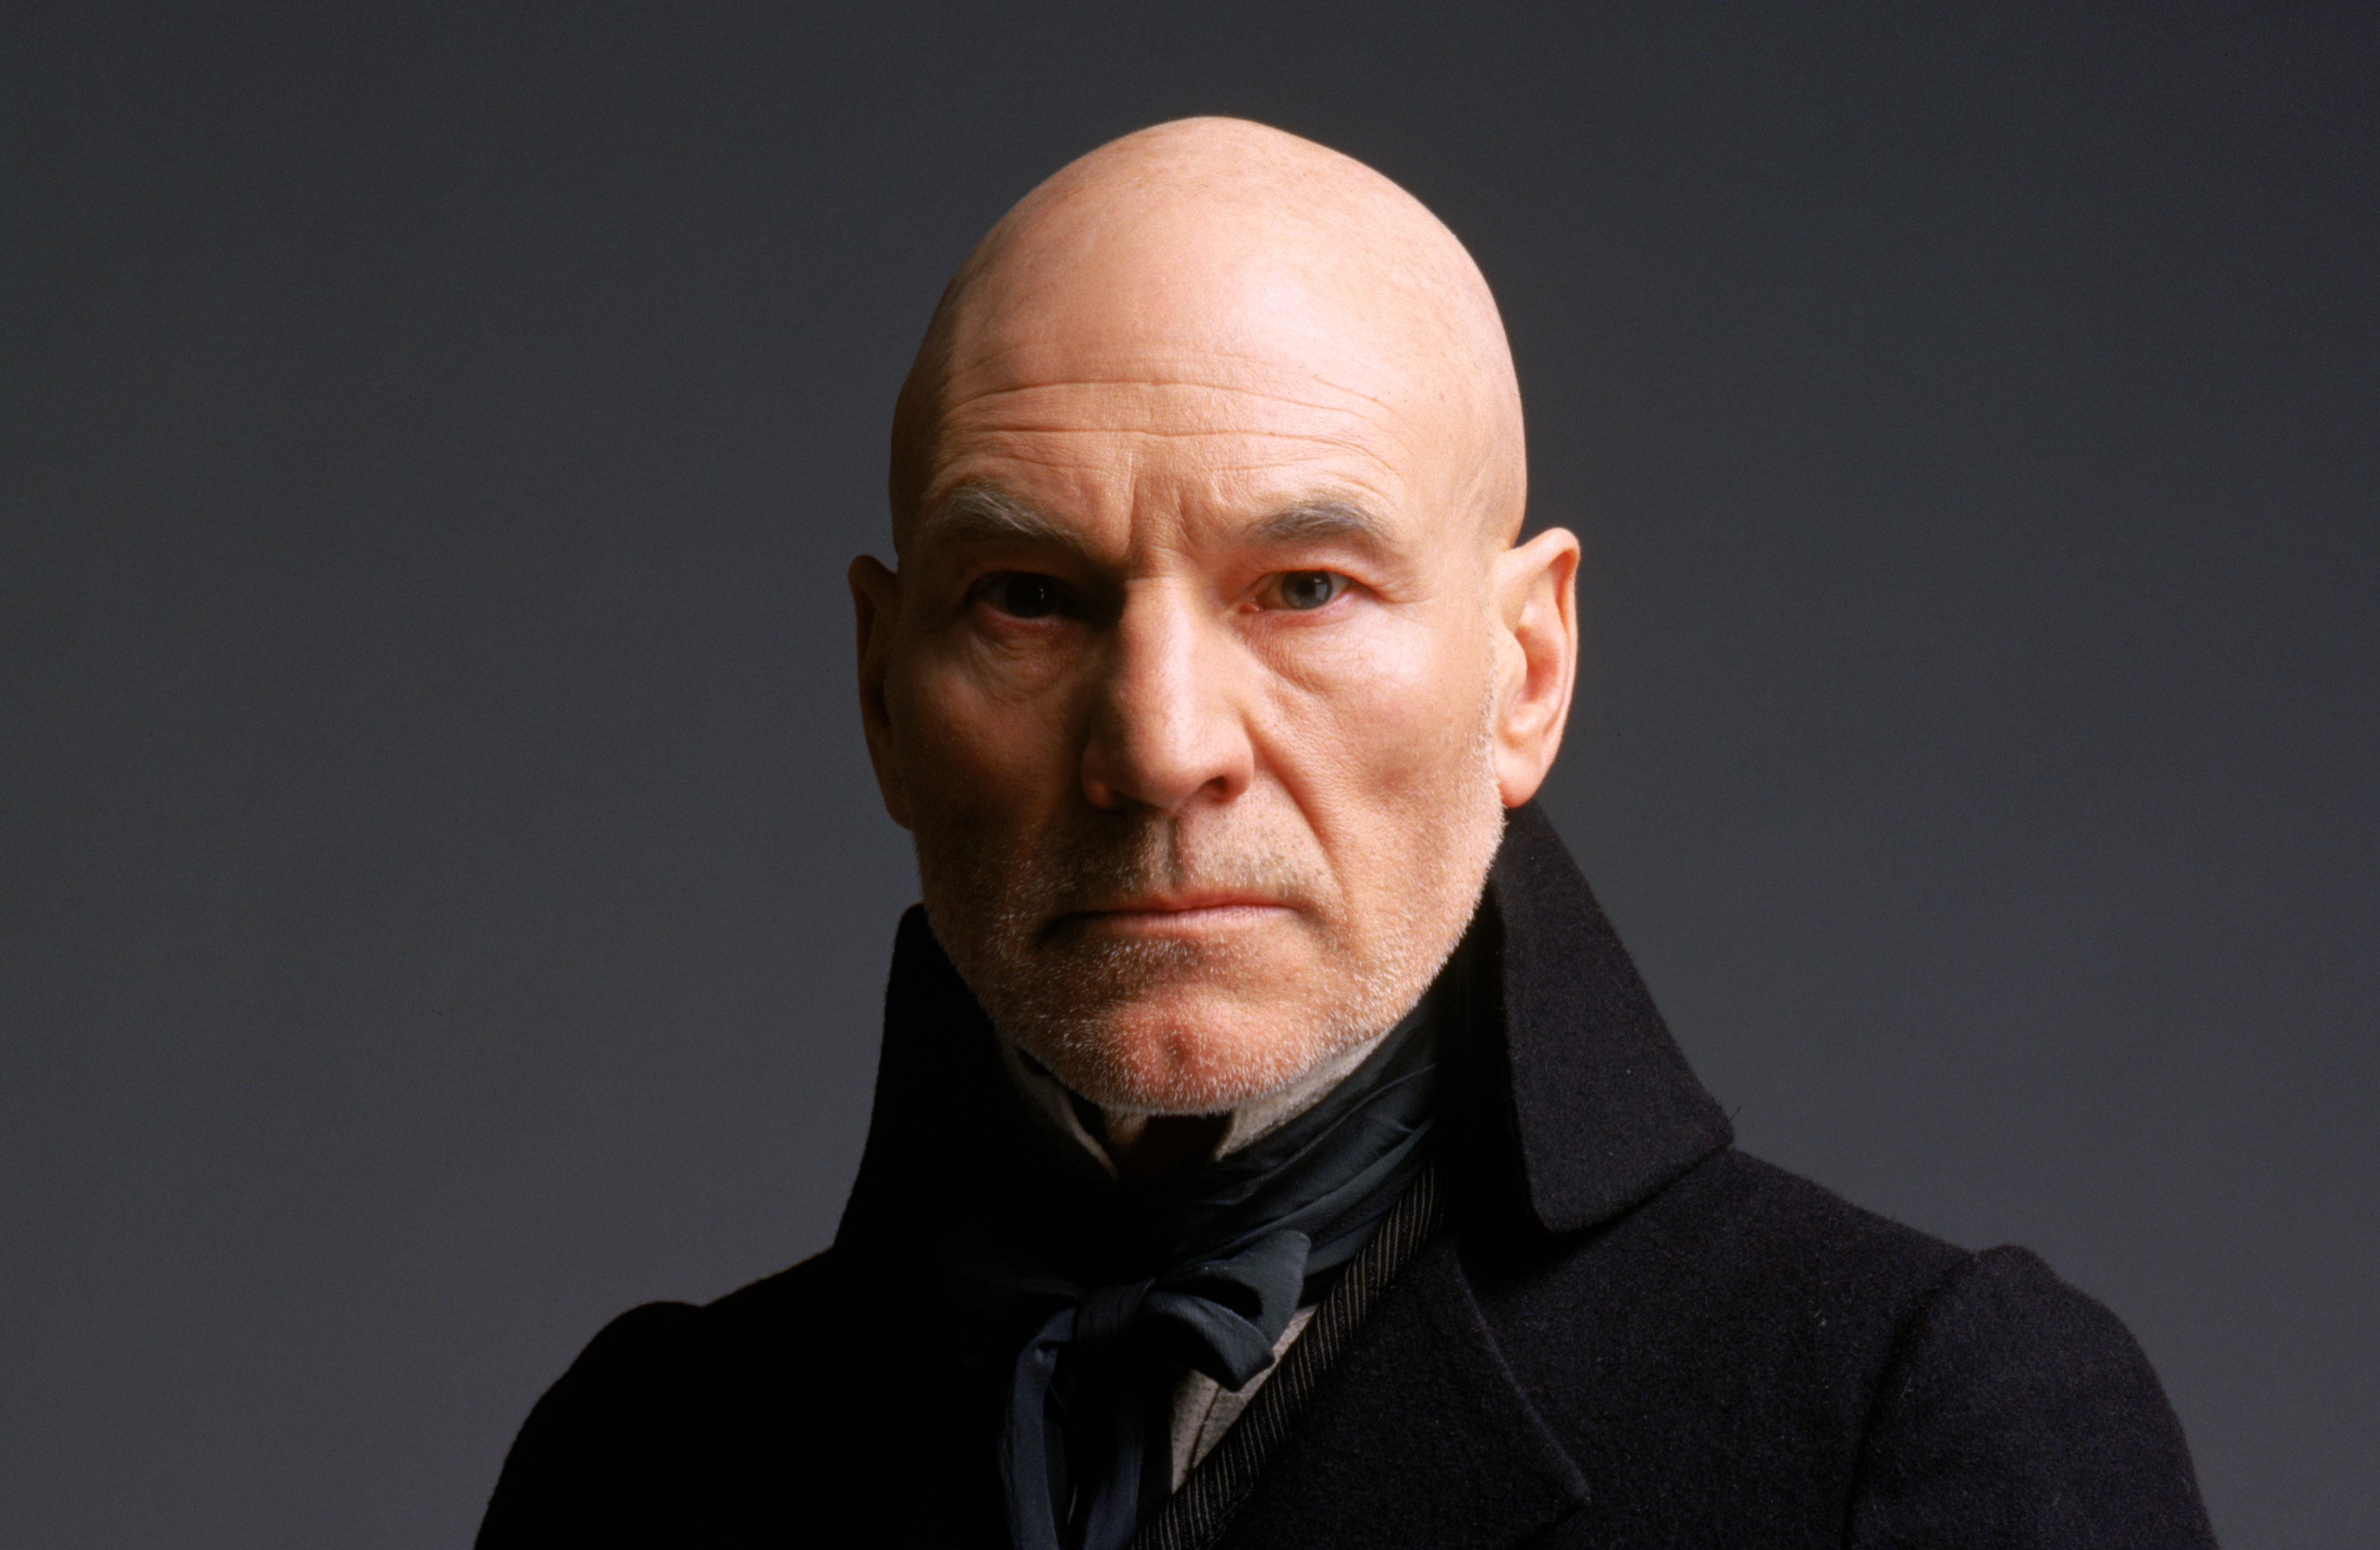 celebrities who are good people - Patrick Stewart